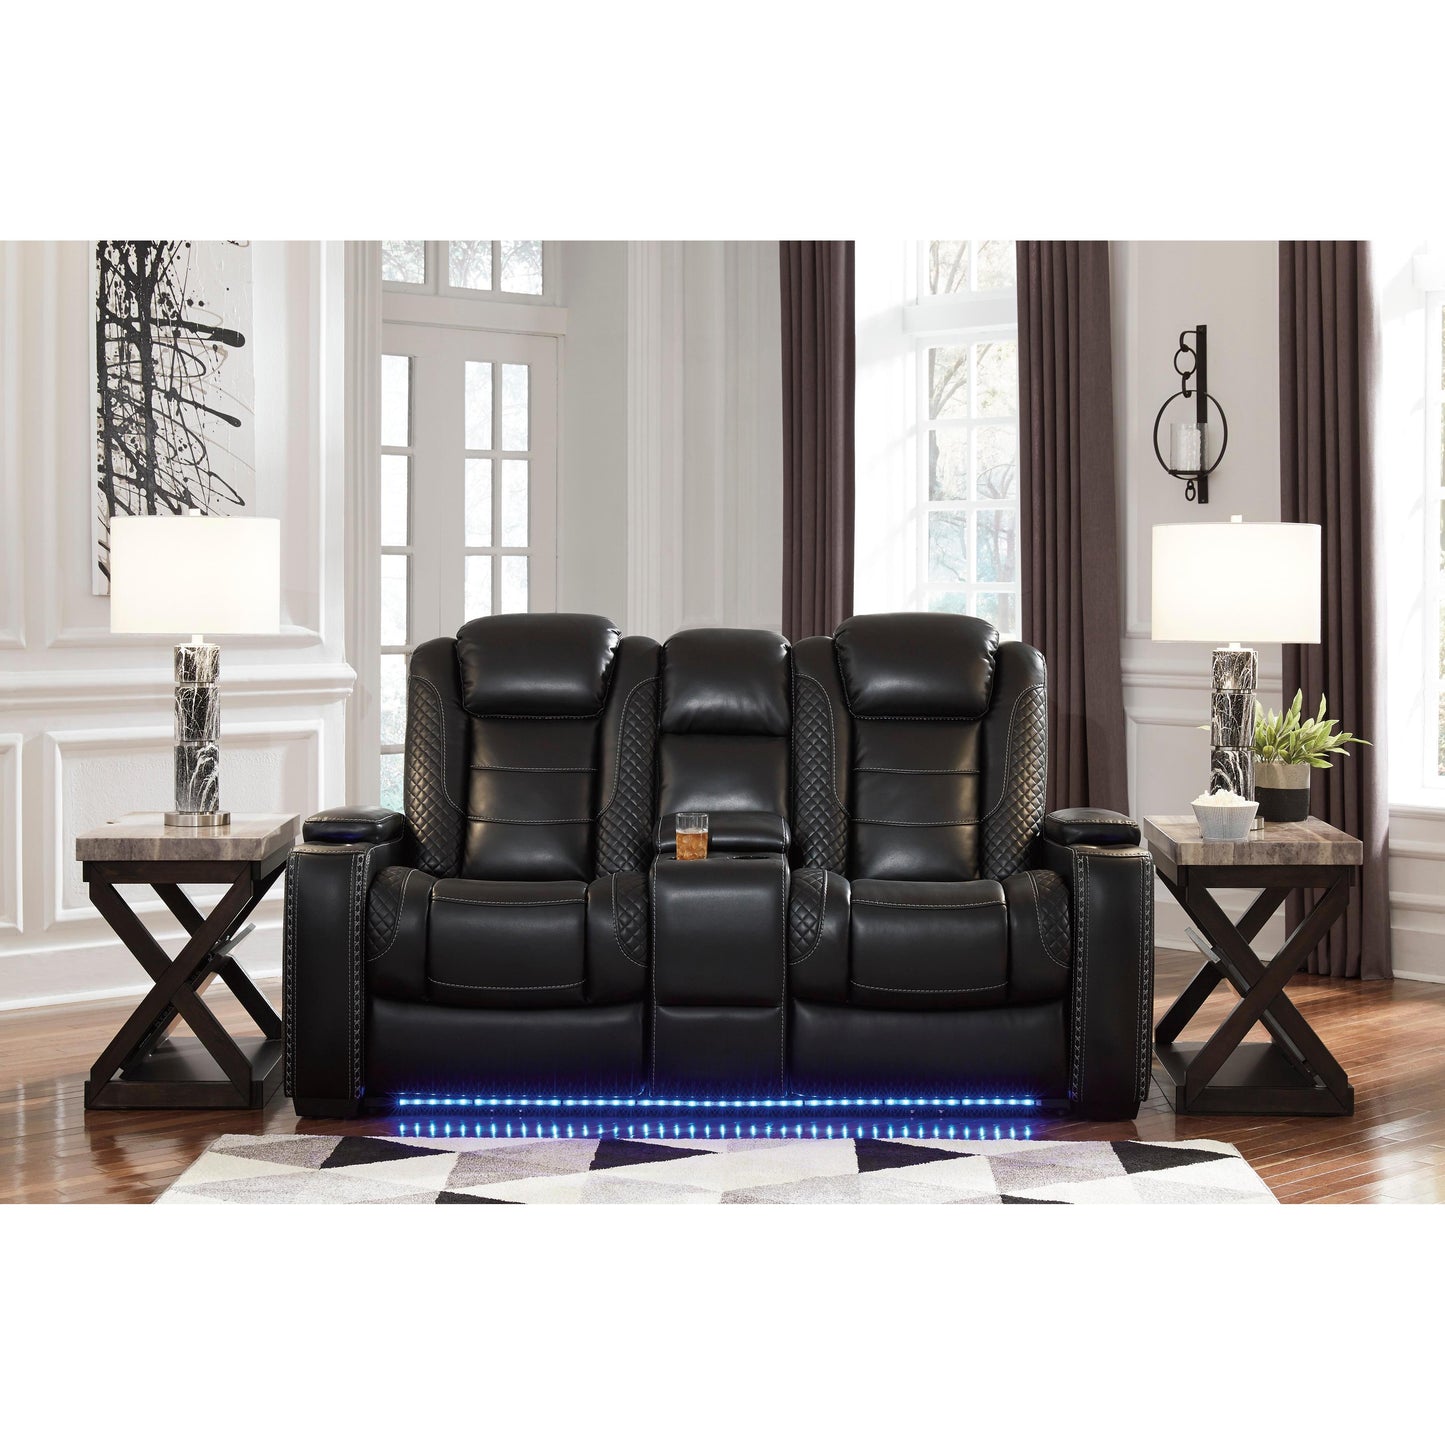 Signature Design by Ashley Party Time 37003 3 pc Power Reclining Living Room Set IMAGE 4